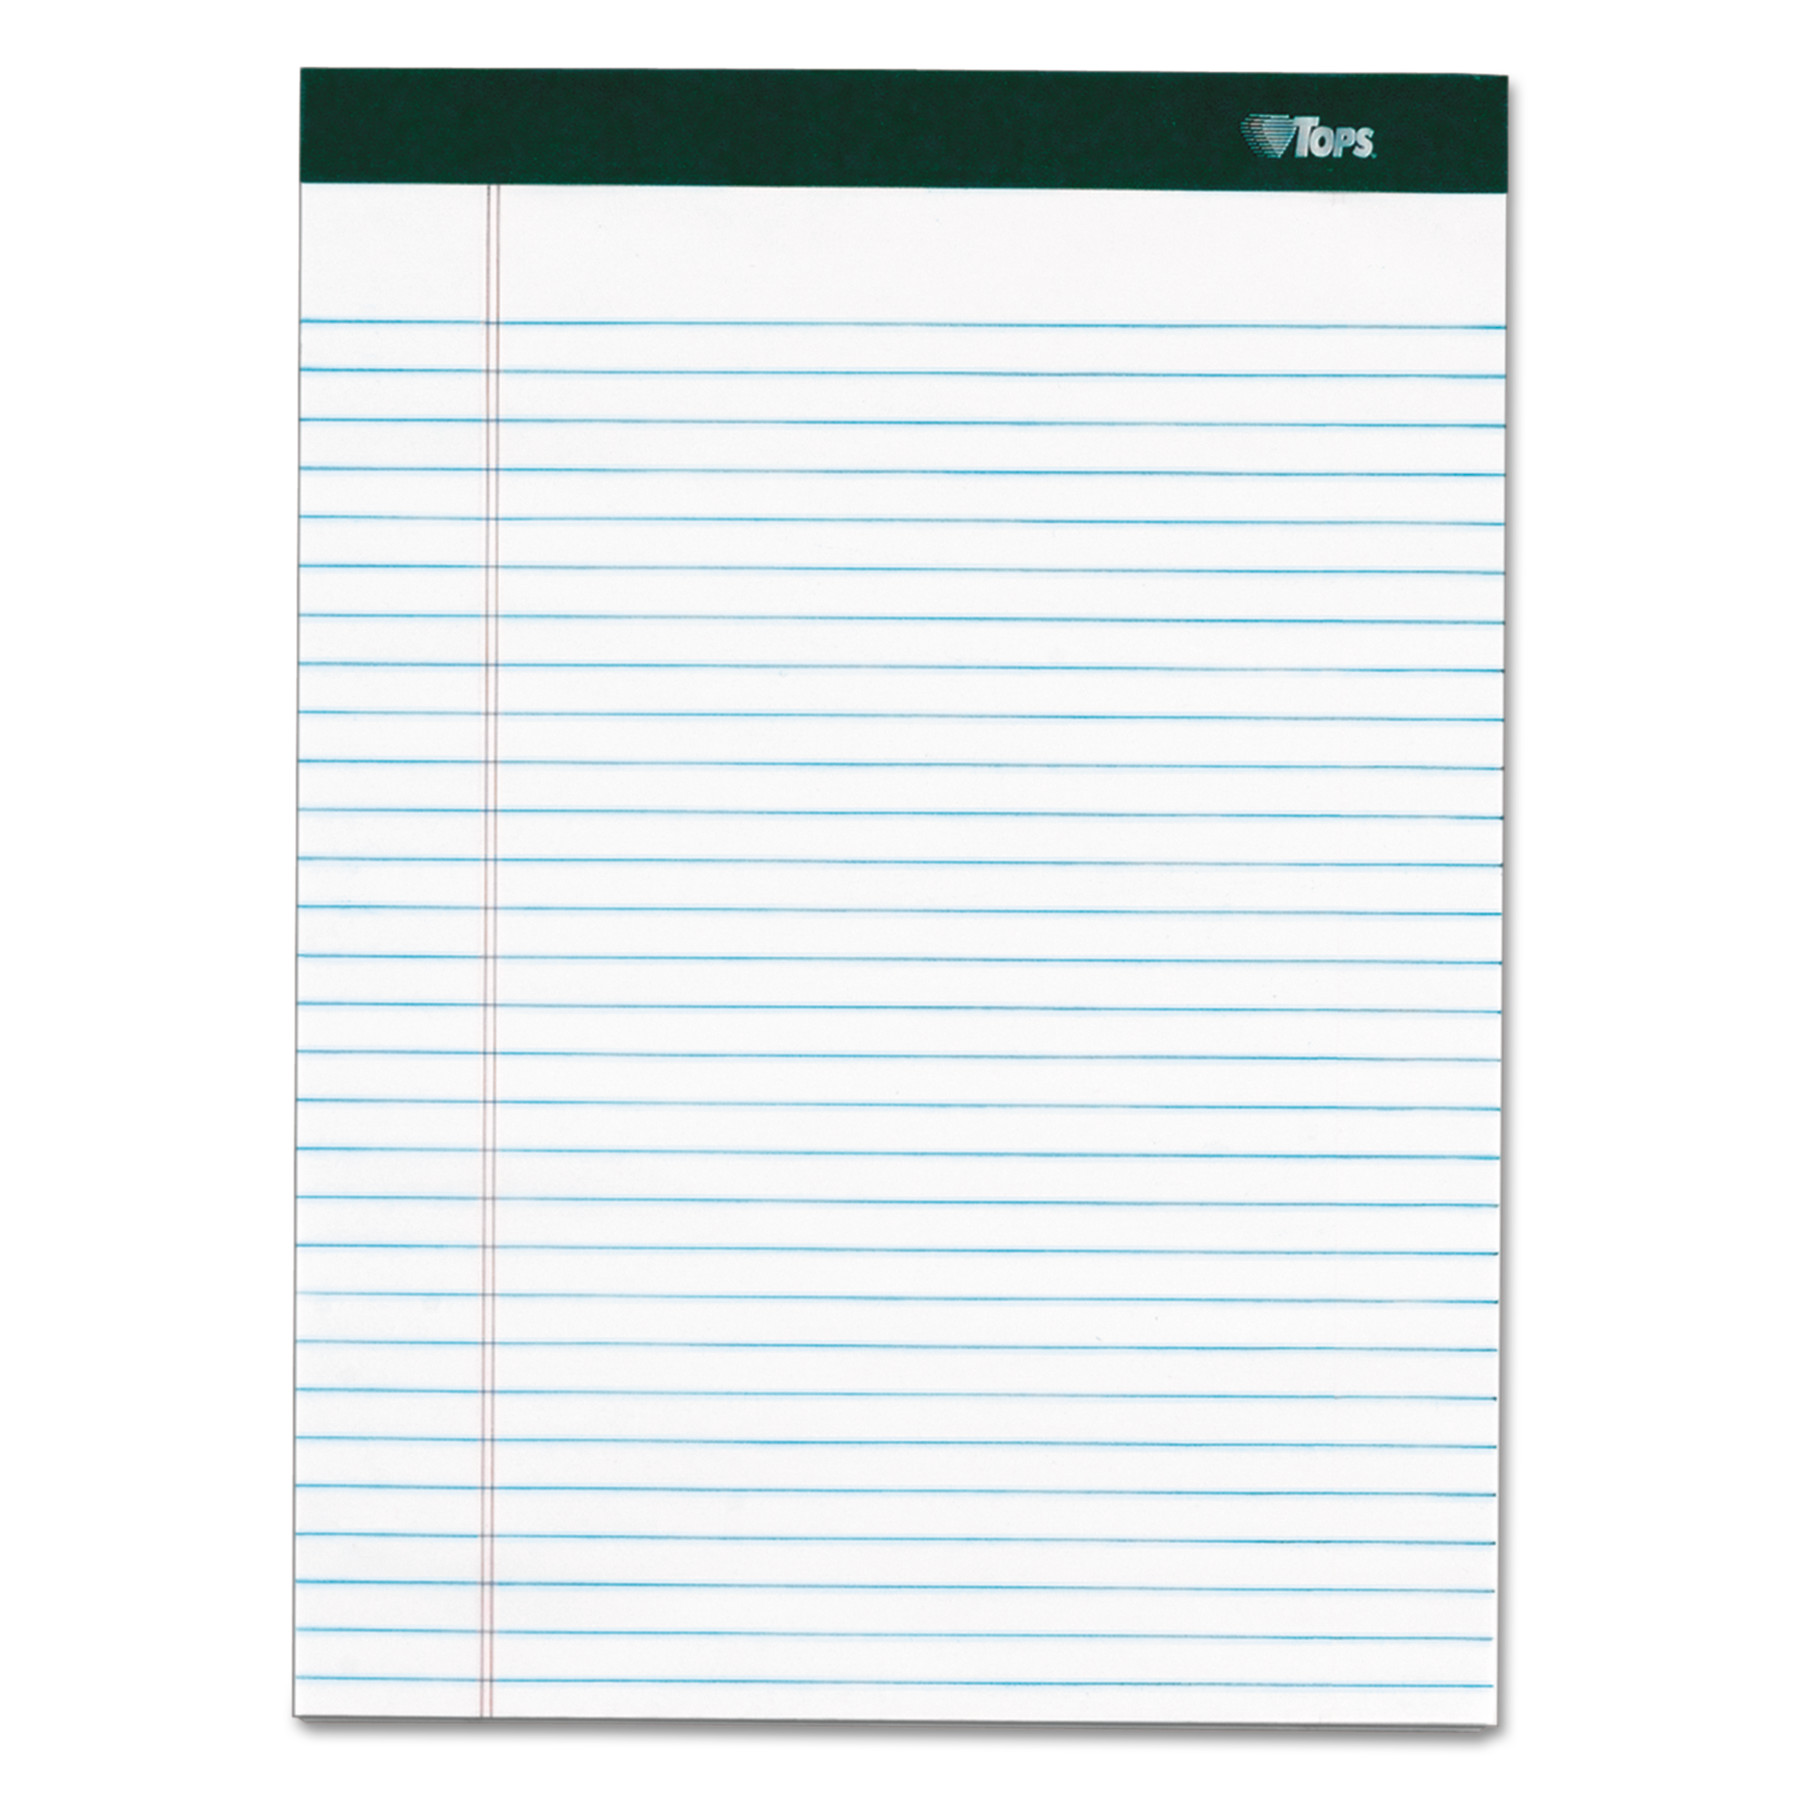 TOPS Double Docket Legal Pad - 100 Sheets - Double Stitched - 16 lb Basis Weight - 8 1/2" x 11 3/4" - 1.76" x 11.8" x 8.5" - Whi